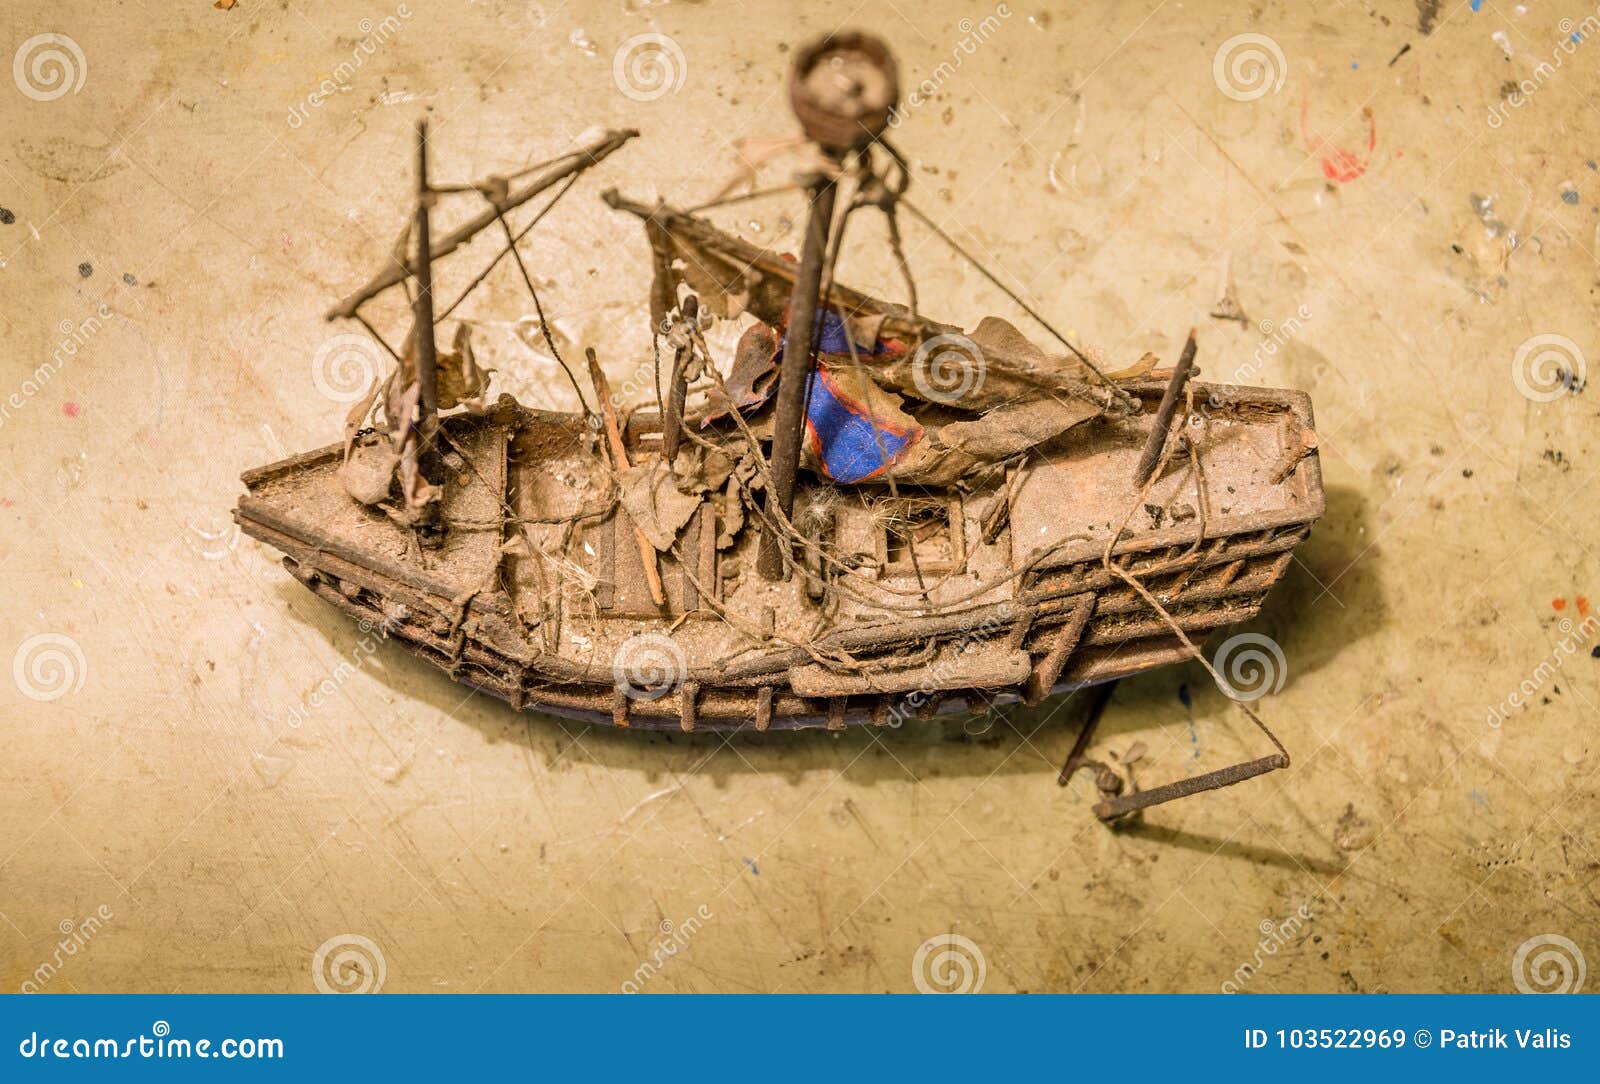 Old Wooden Boat Model on the Table. Stock Image - Image of home, collect:  103522969